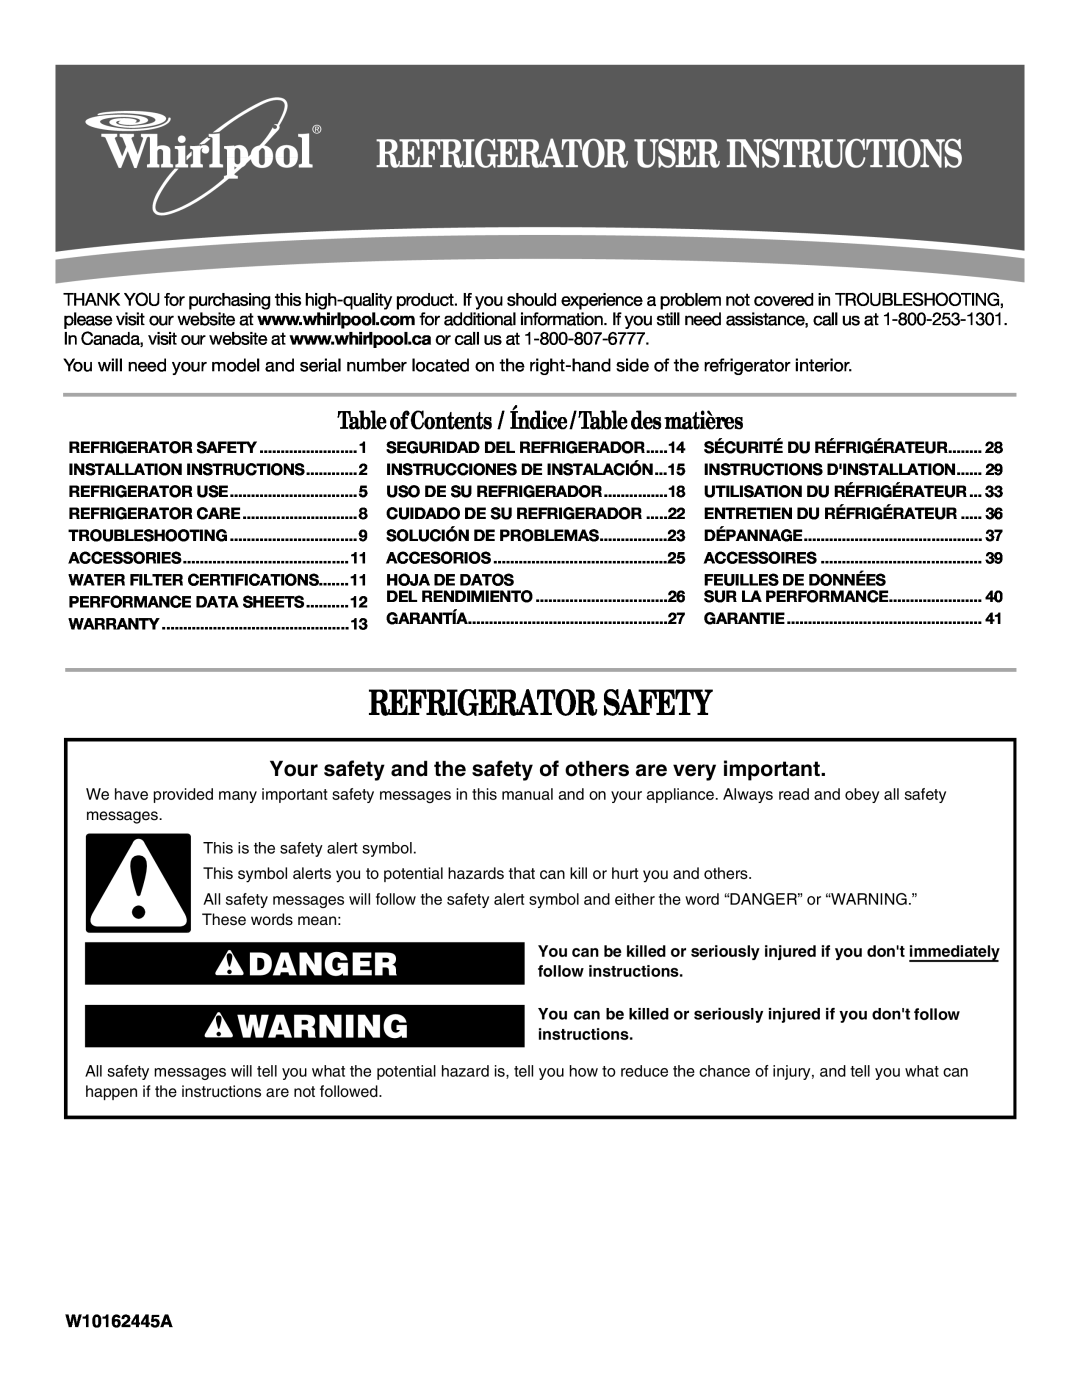 Whirlpool ED5FHAXVS installation instructions Refrigerator Safety, Danger, Table ofContents / Índice / Table des matières 